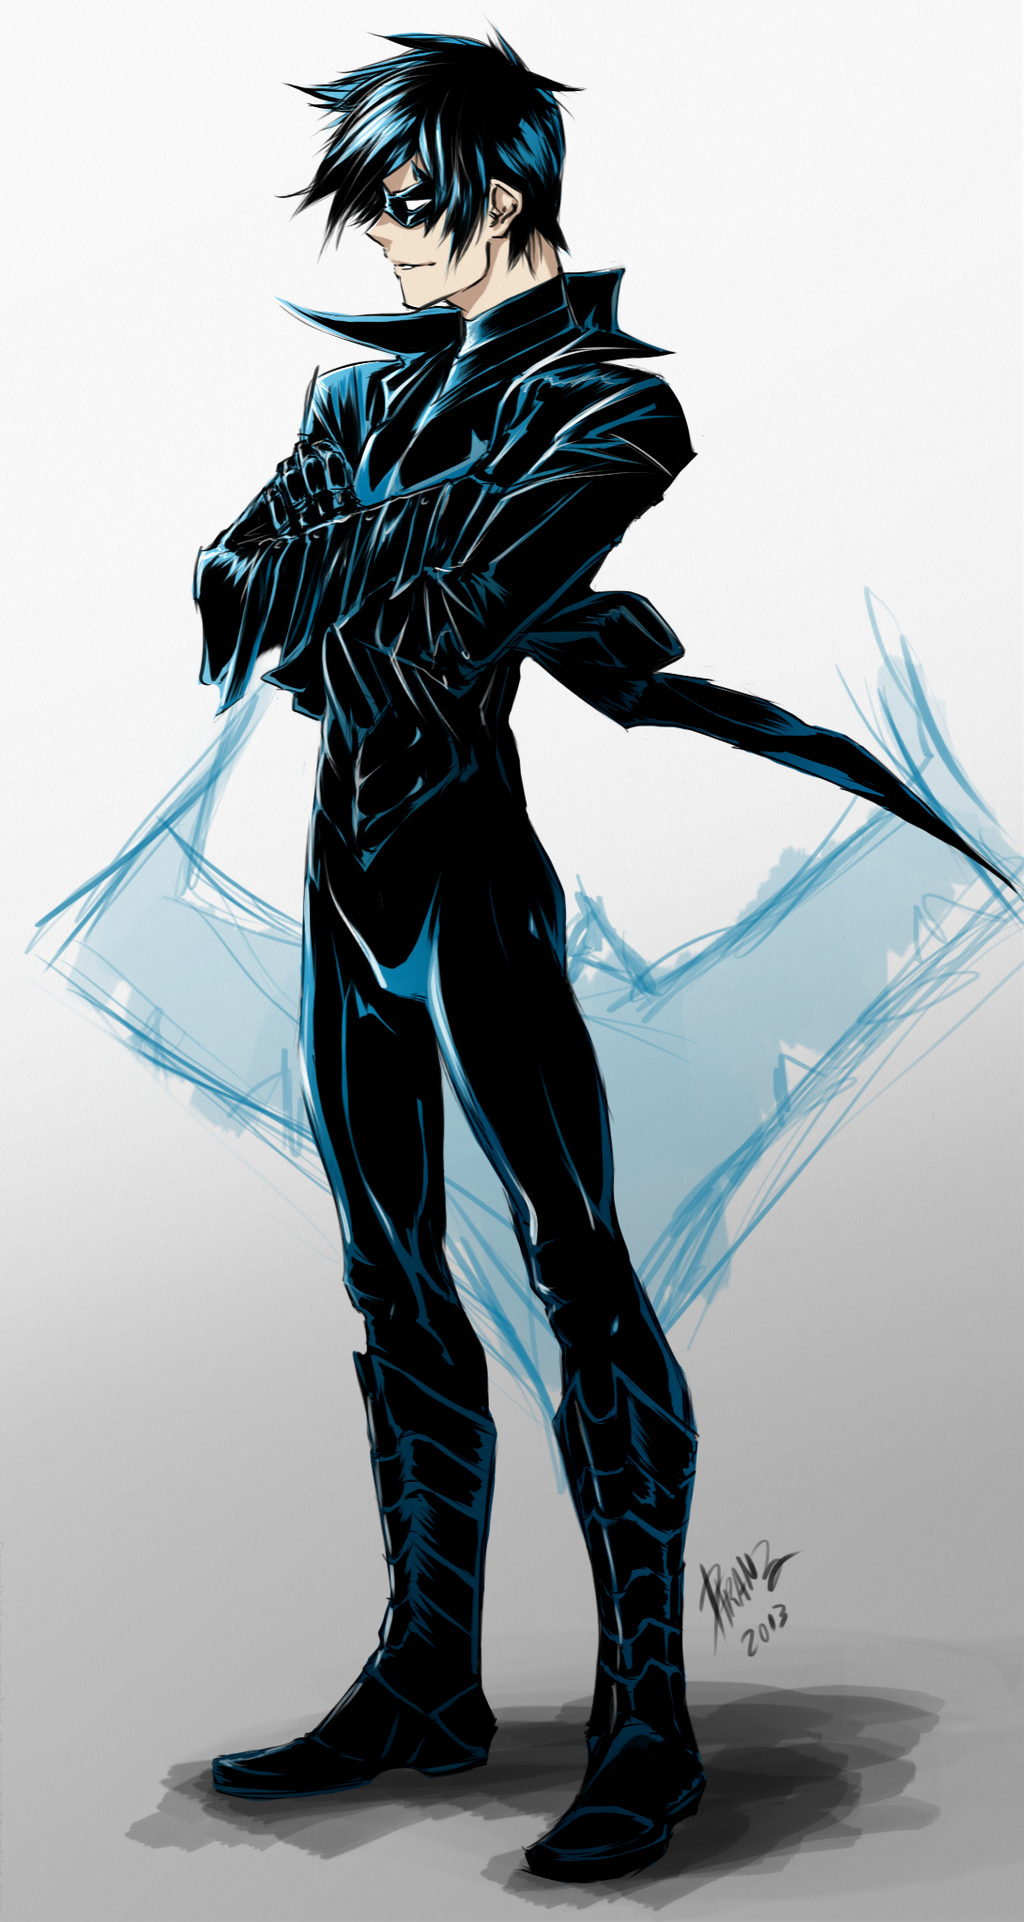 HQ Nightwing Wallpapers | File 1126.24Kb